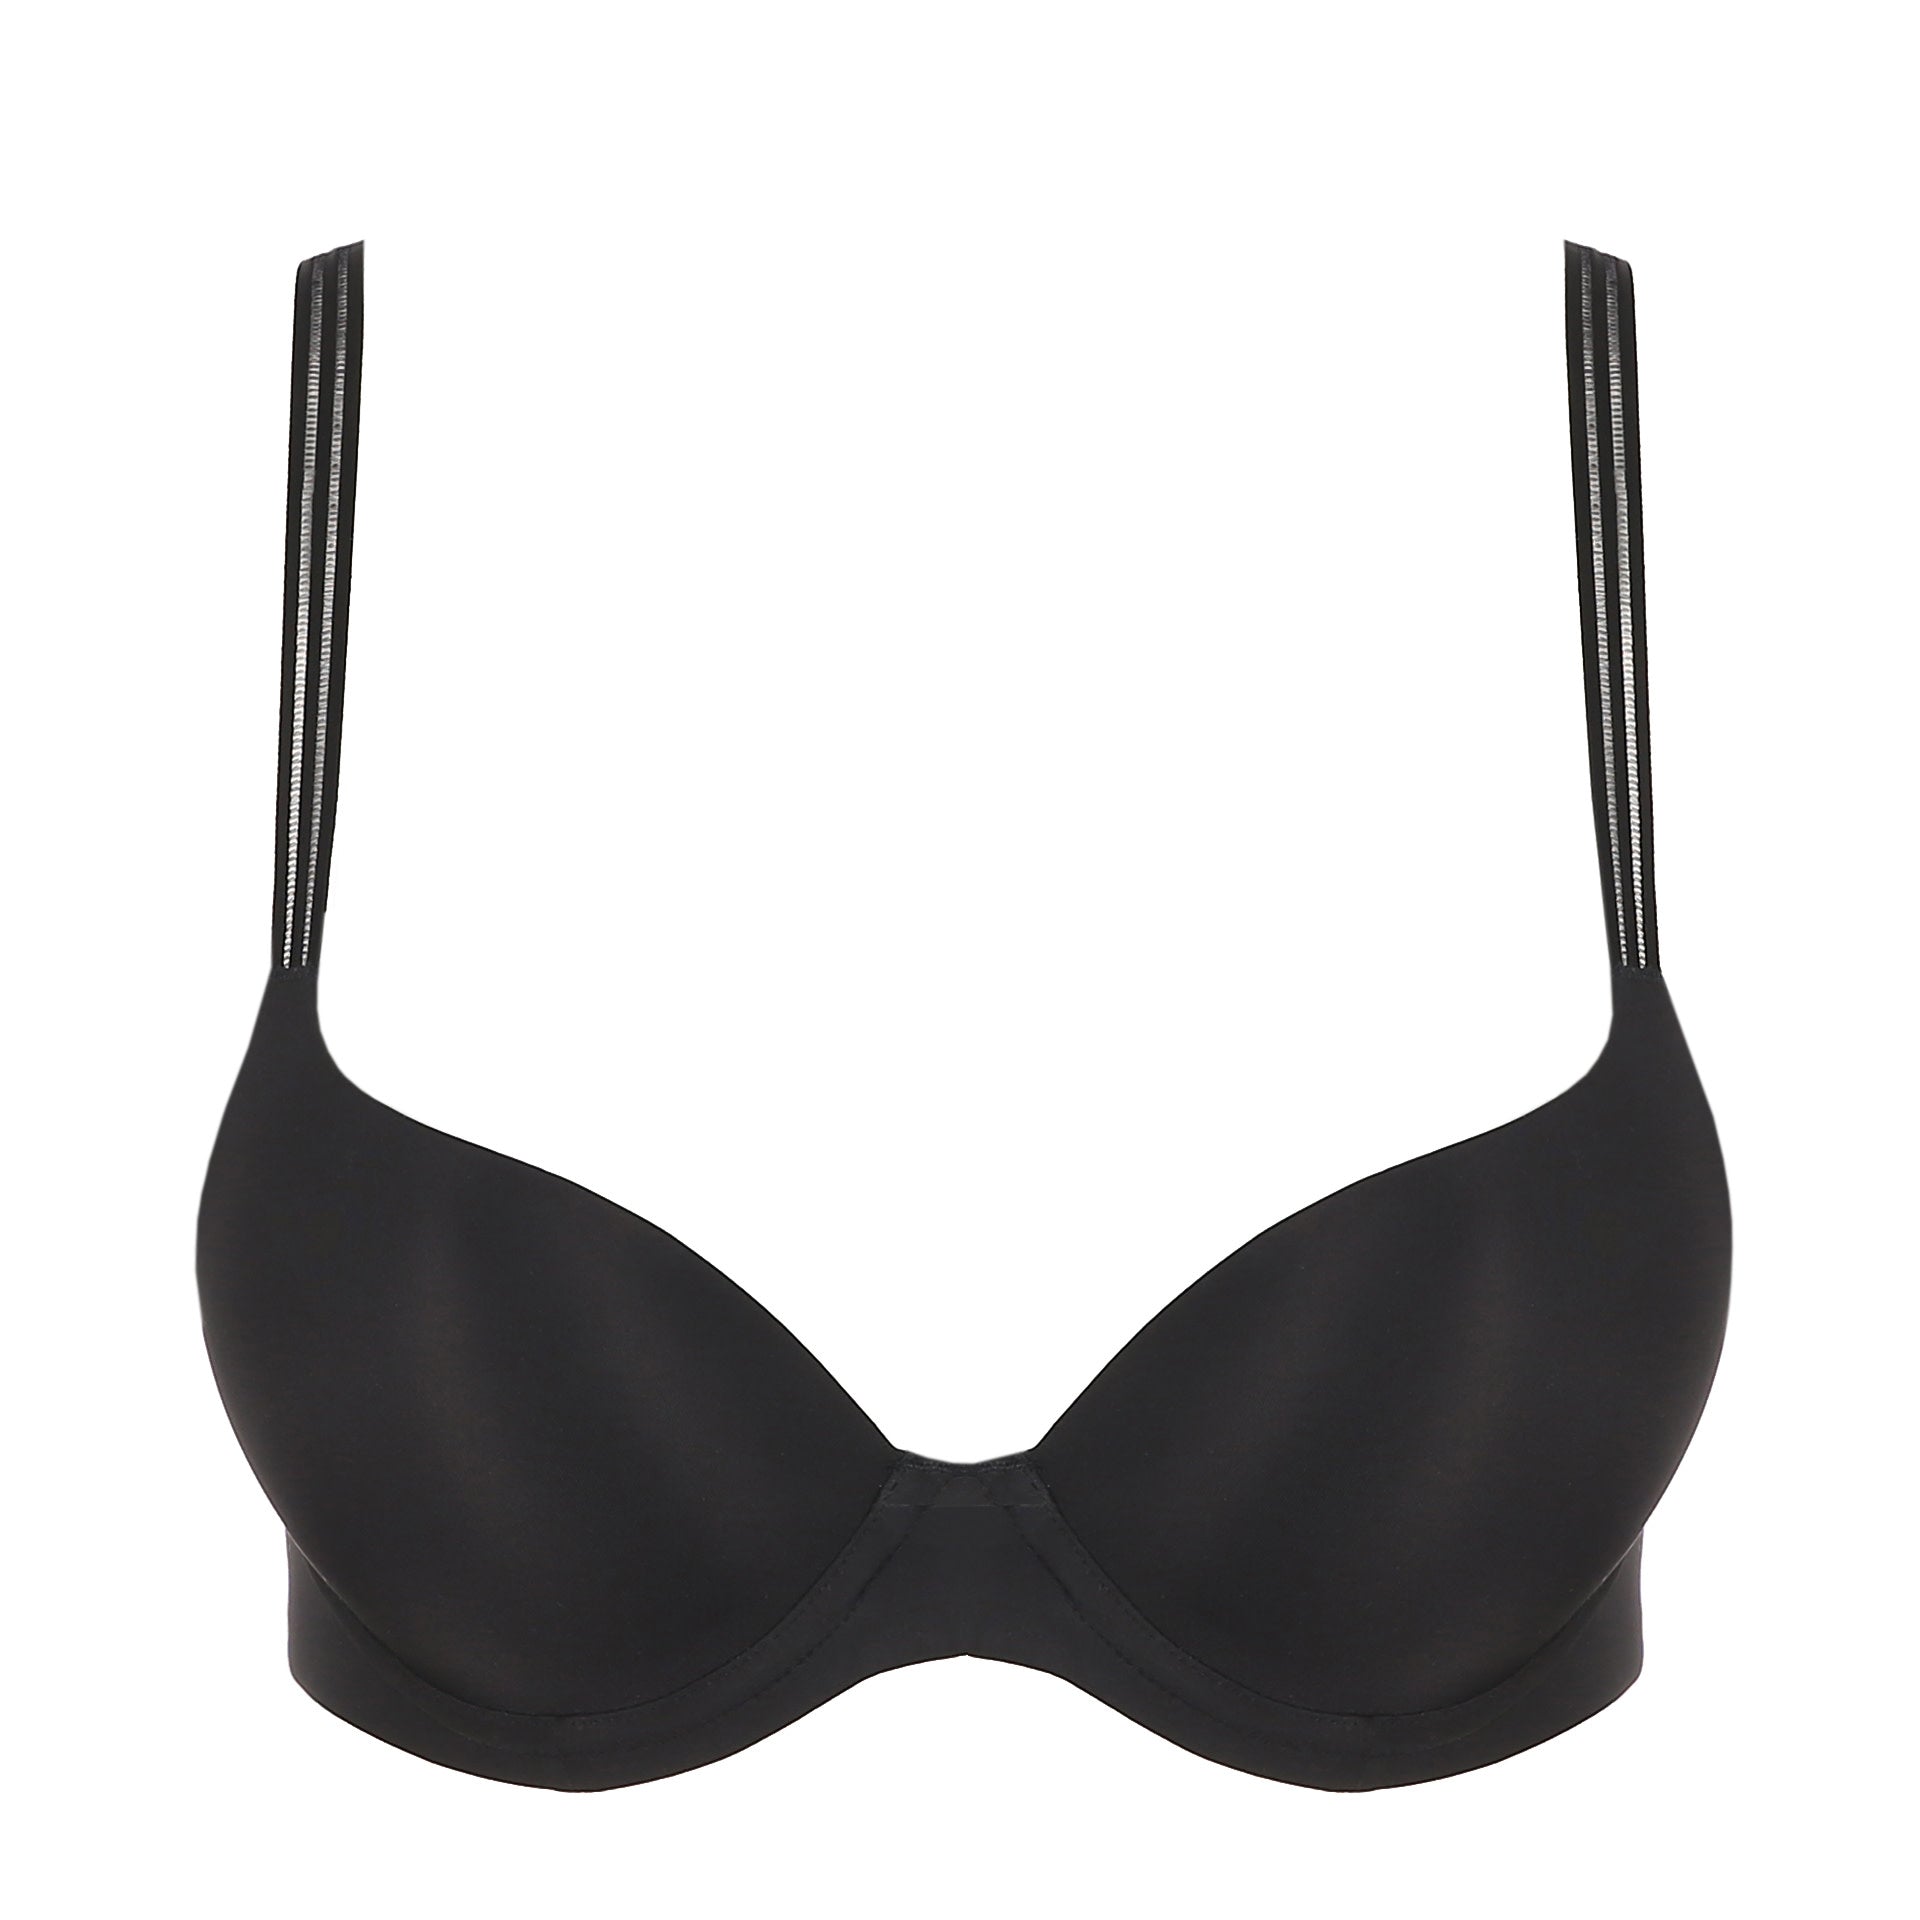 The Caron harness bra in black satin with strap detailing.